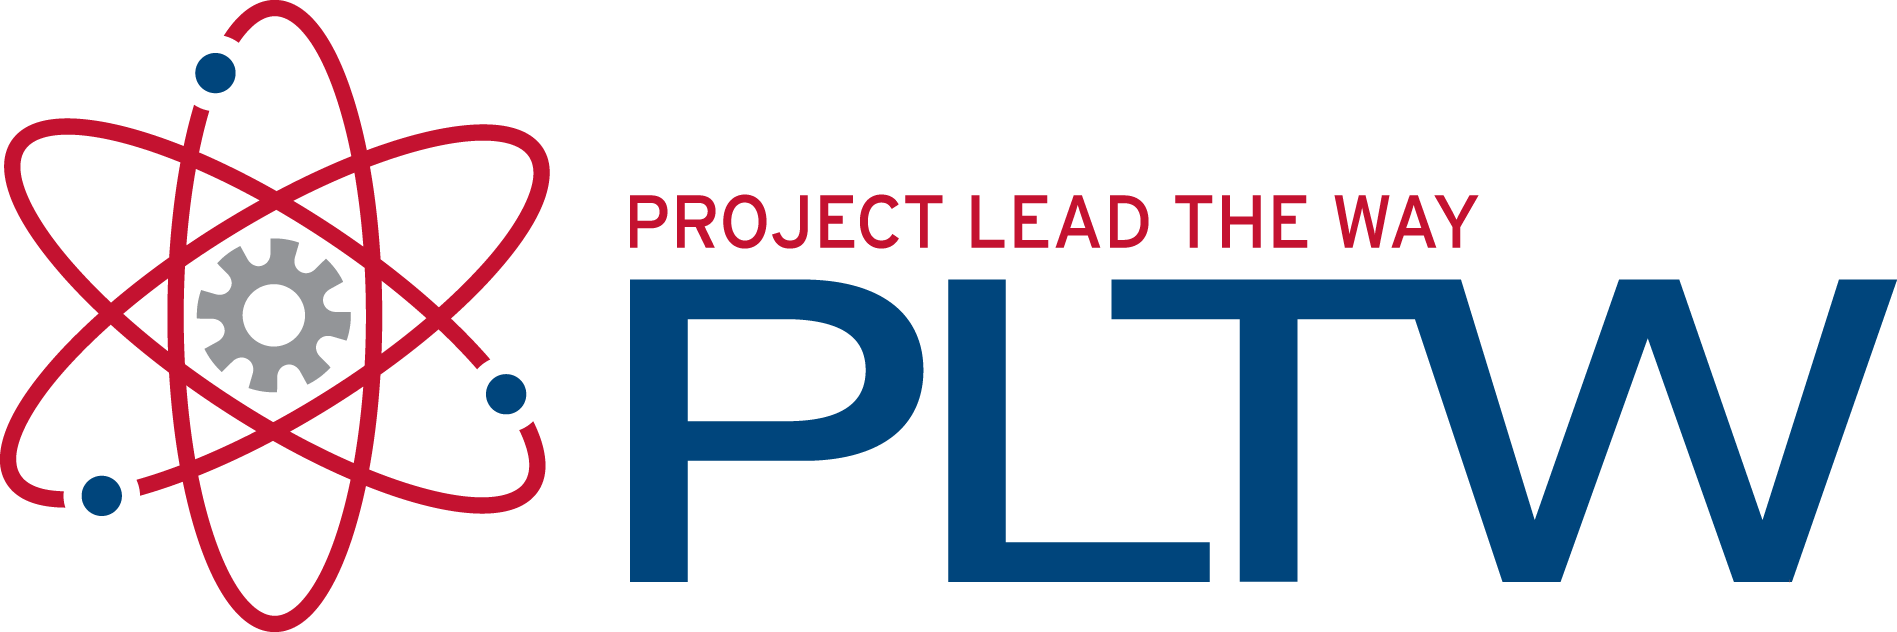 Project Lead The Way Logo (1897x632)